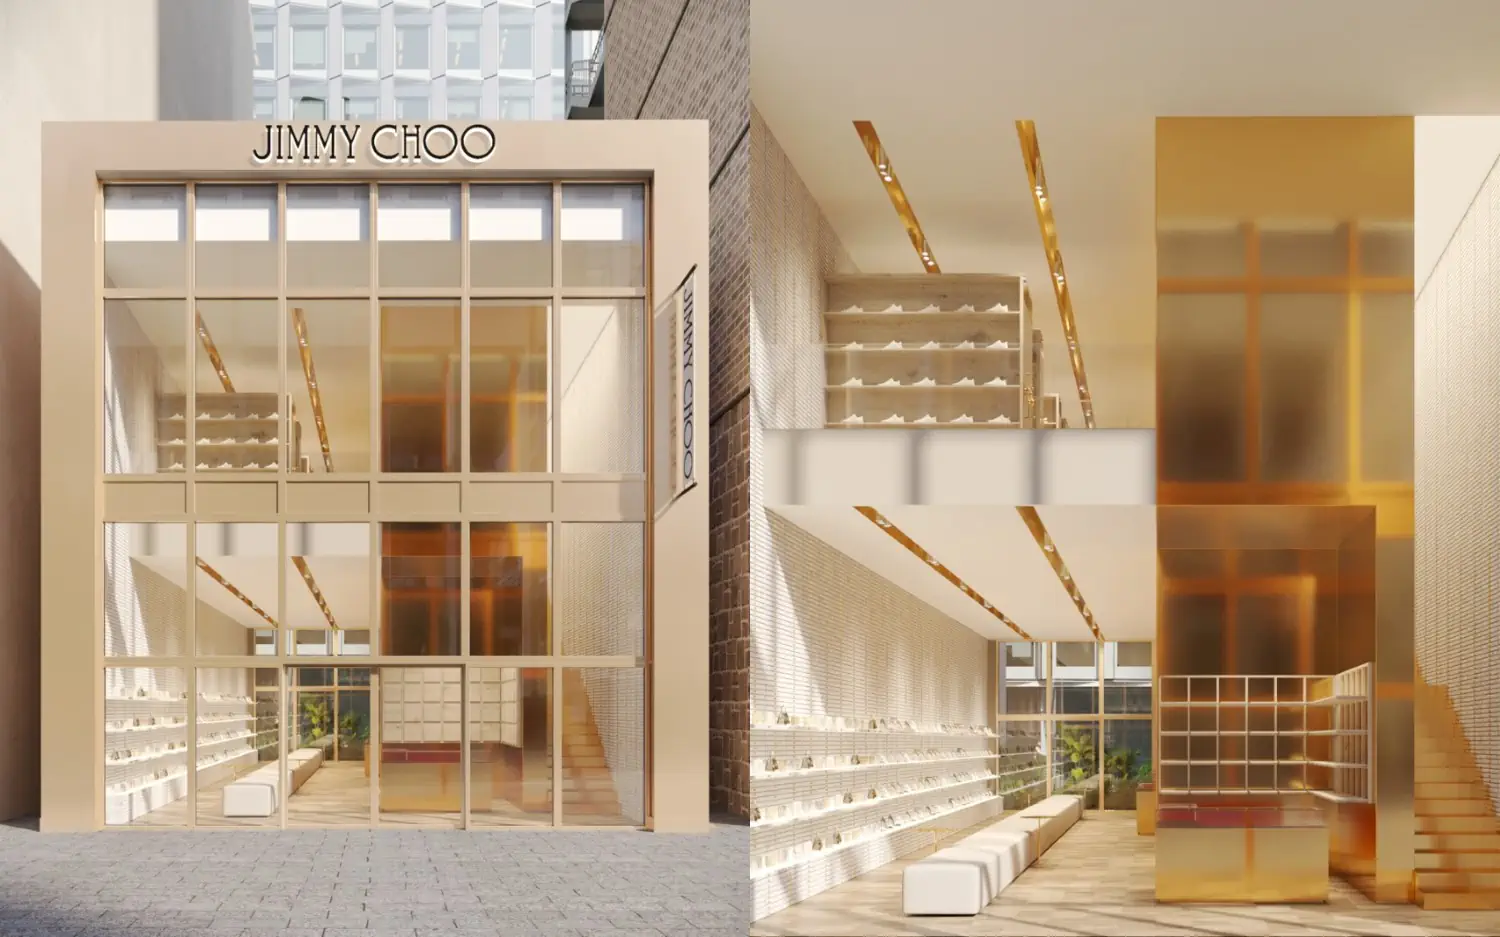 Jimmy Choo opens the largest store in Japan in the Tokyo's Ginza district